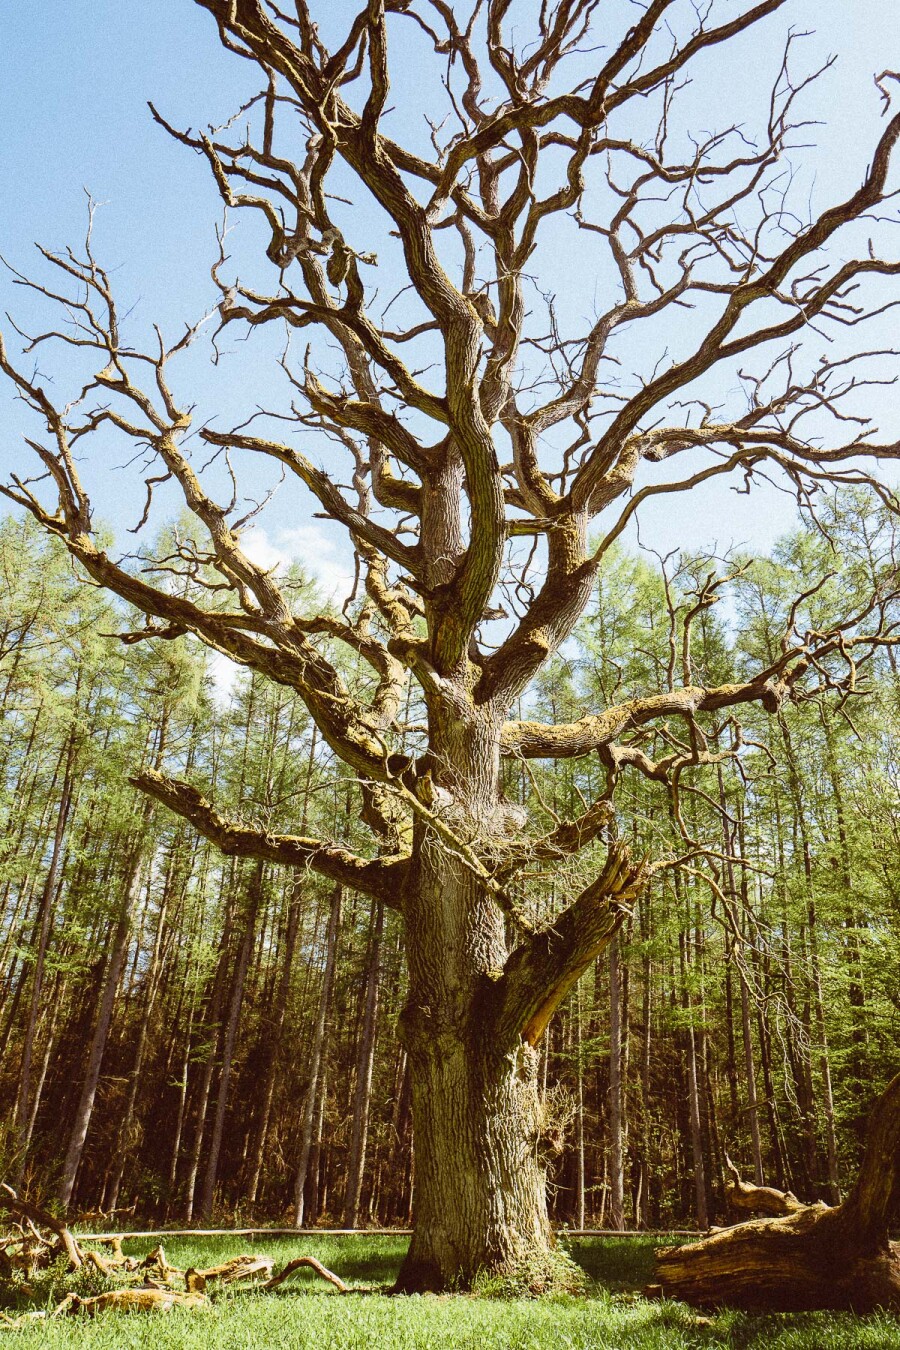 A very big and old tree without foliage